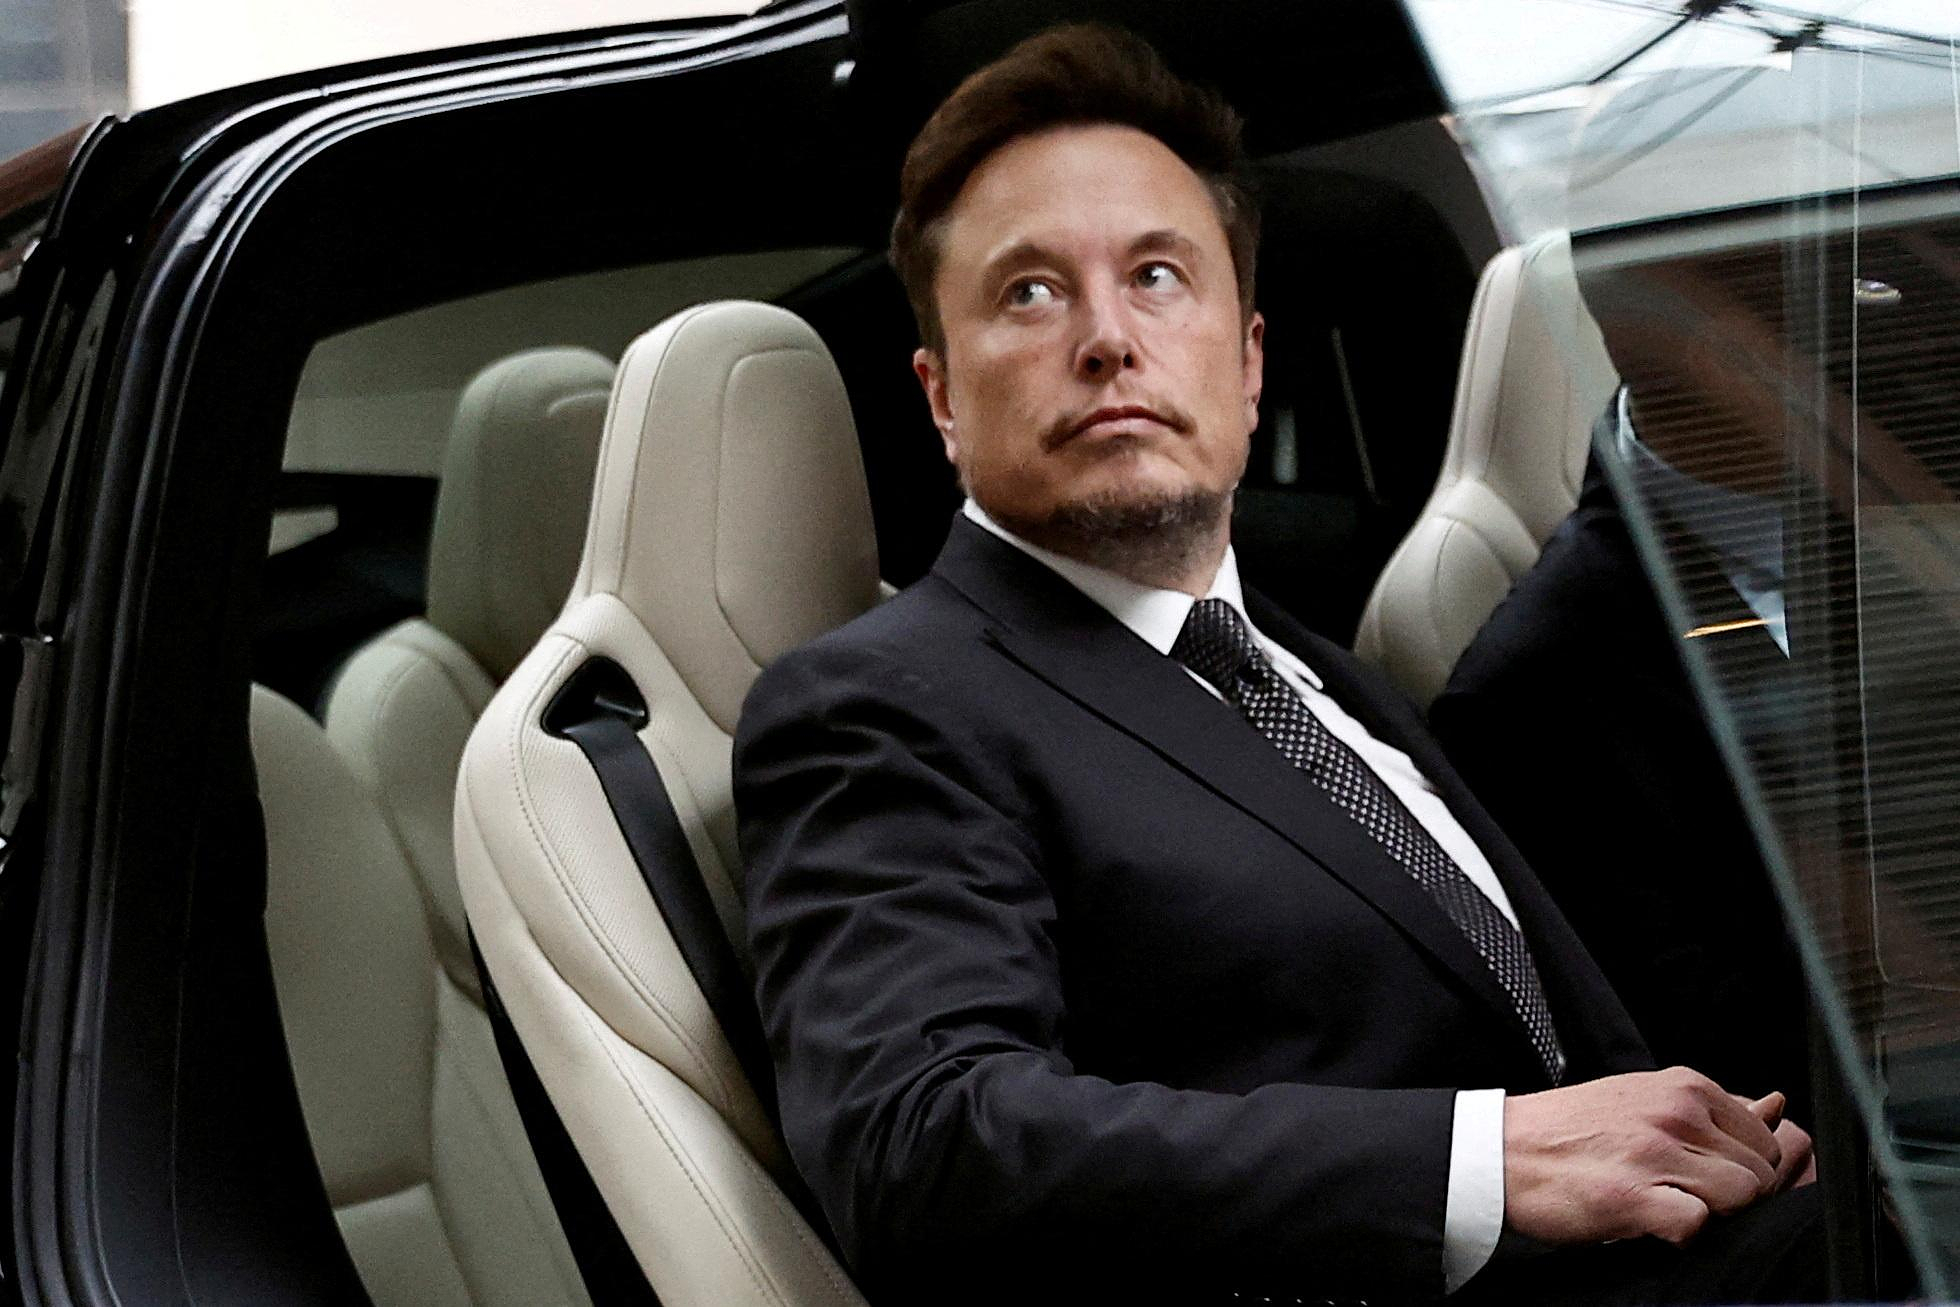 Elon Musk arrives in China to negotiate data transfer and deployment of Tesla autopilot